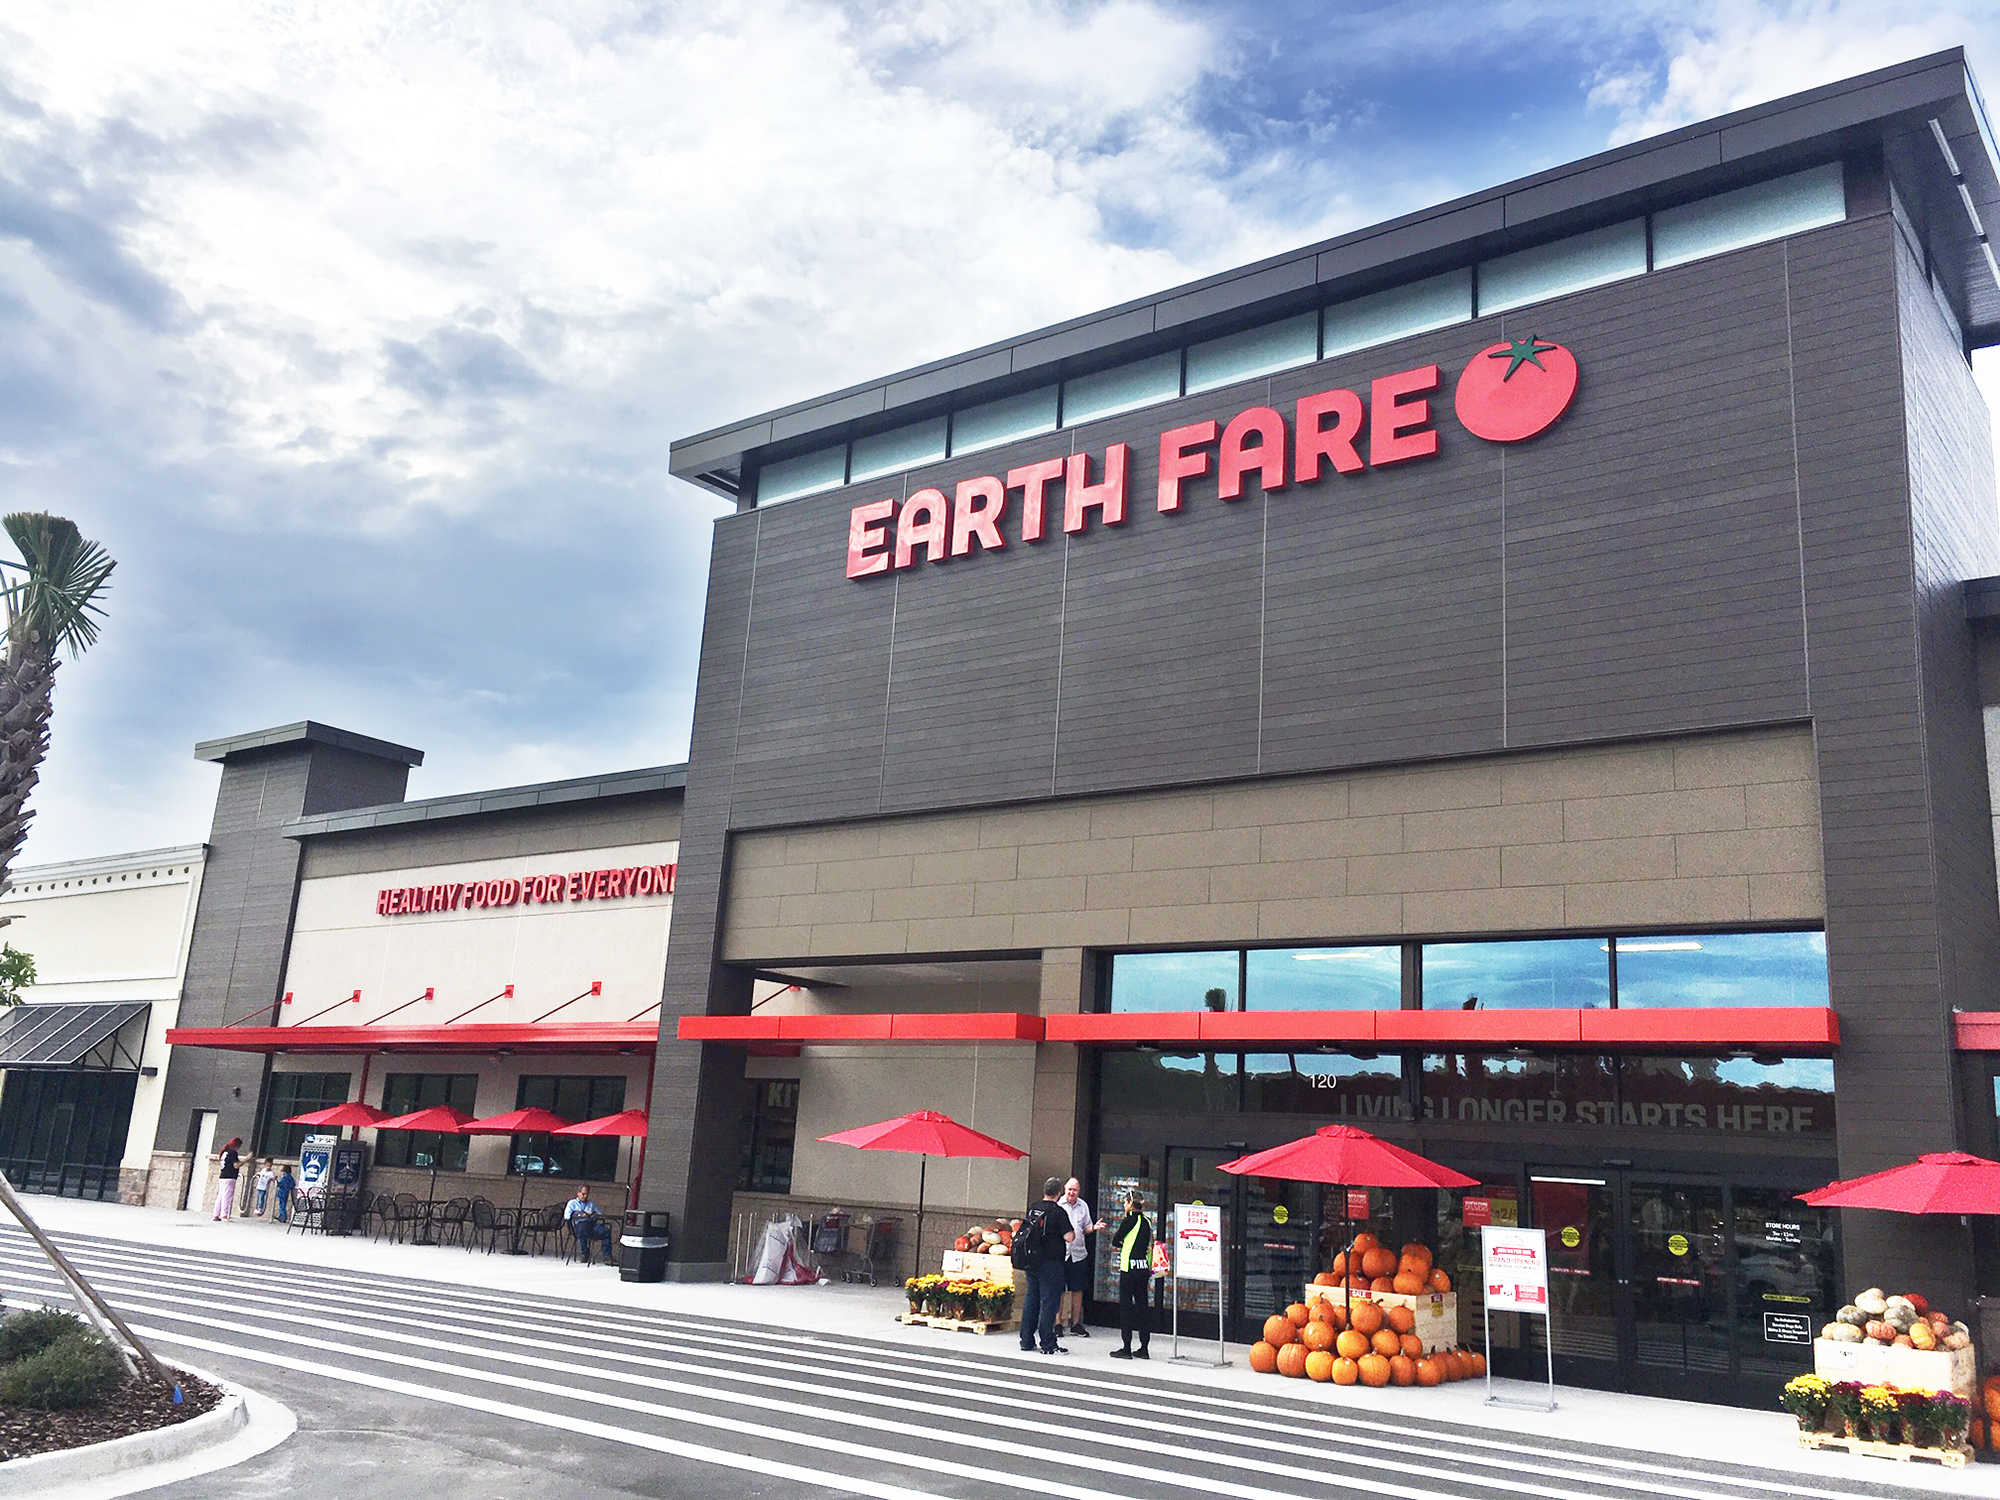 Winn-Dixie is taking the space of a former Earth Fare market